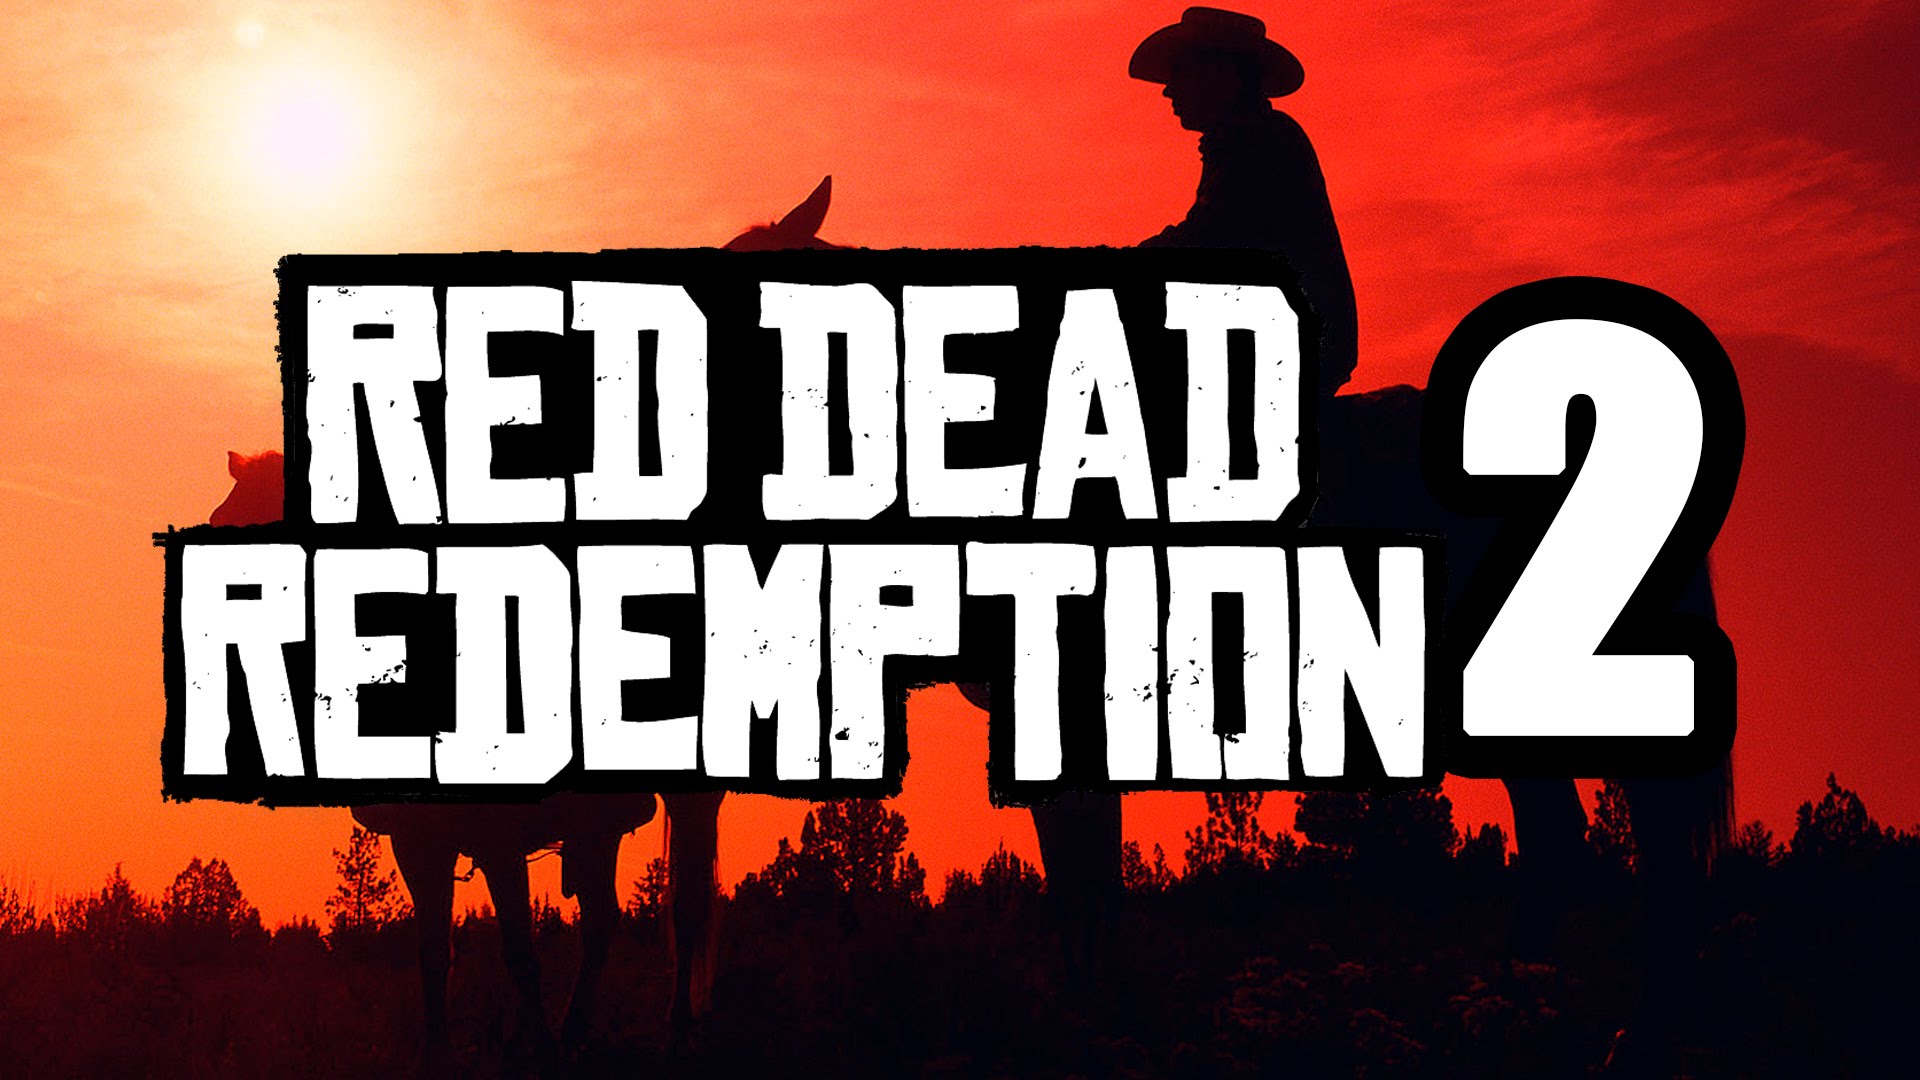 Amazing Red Dead Redemption 2 Pictures & Backgrounds